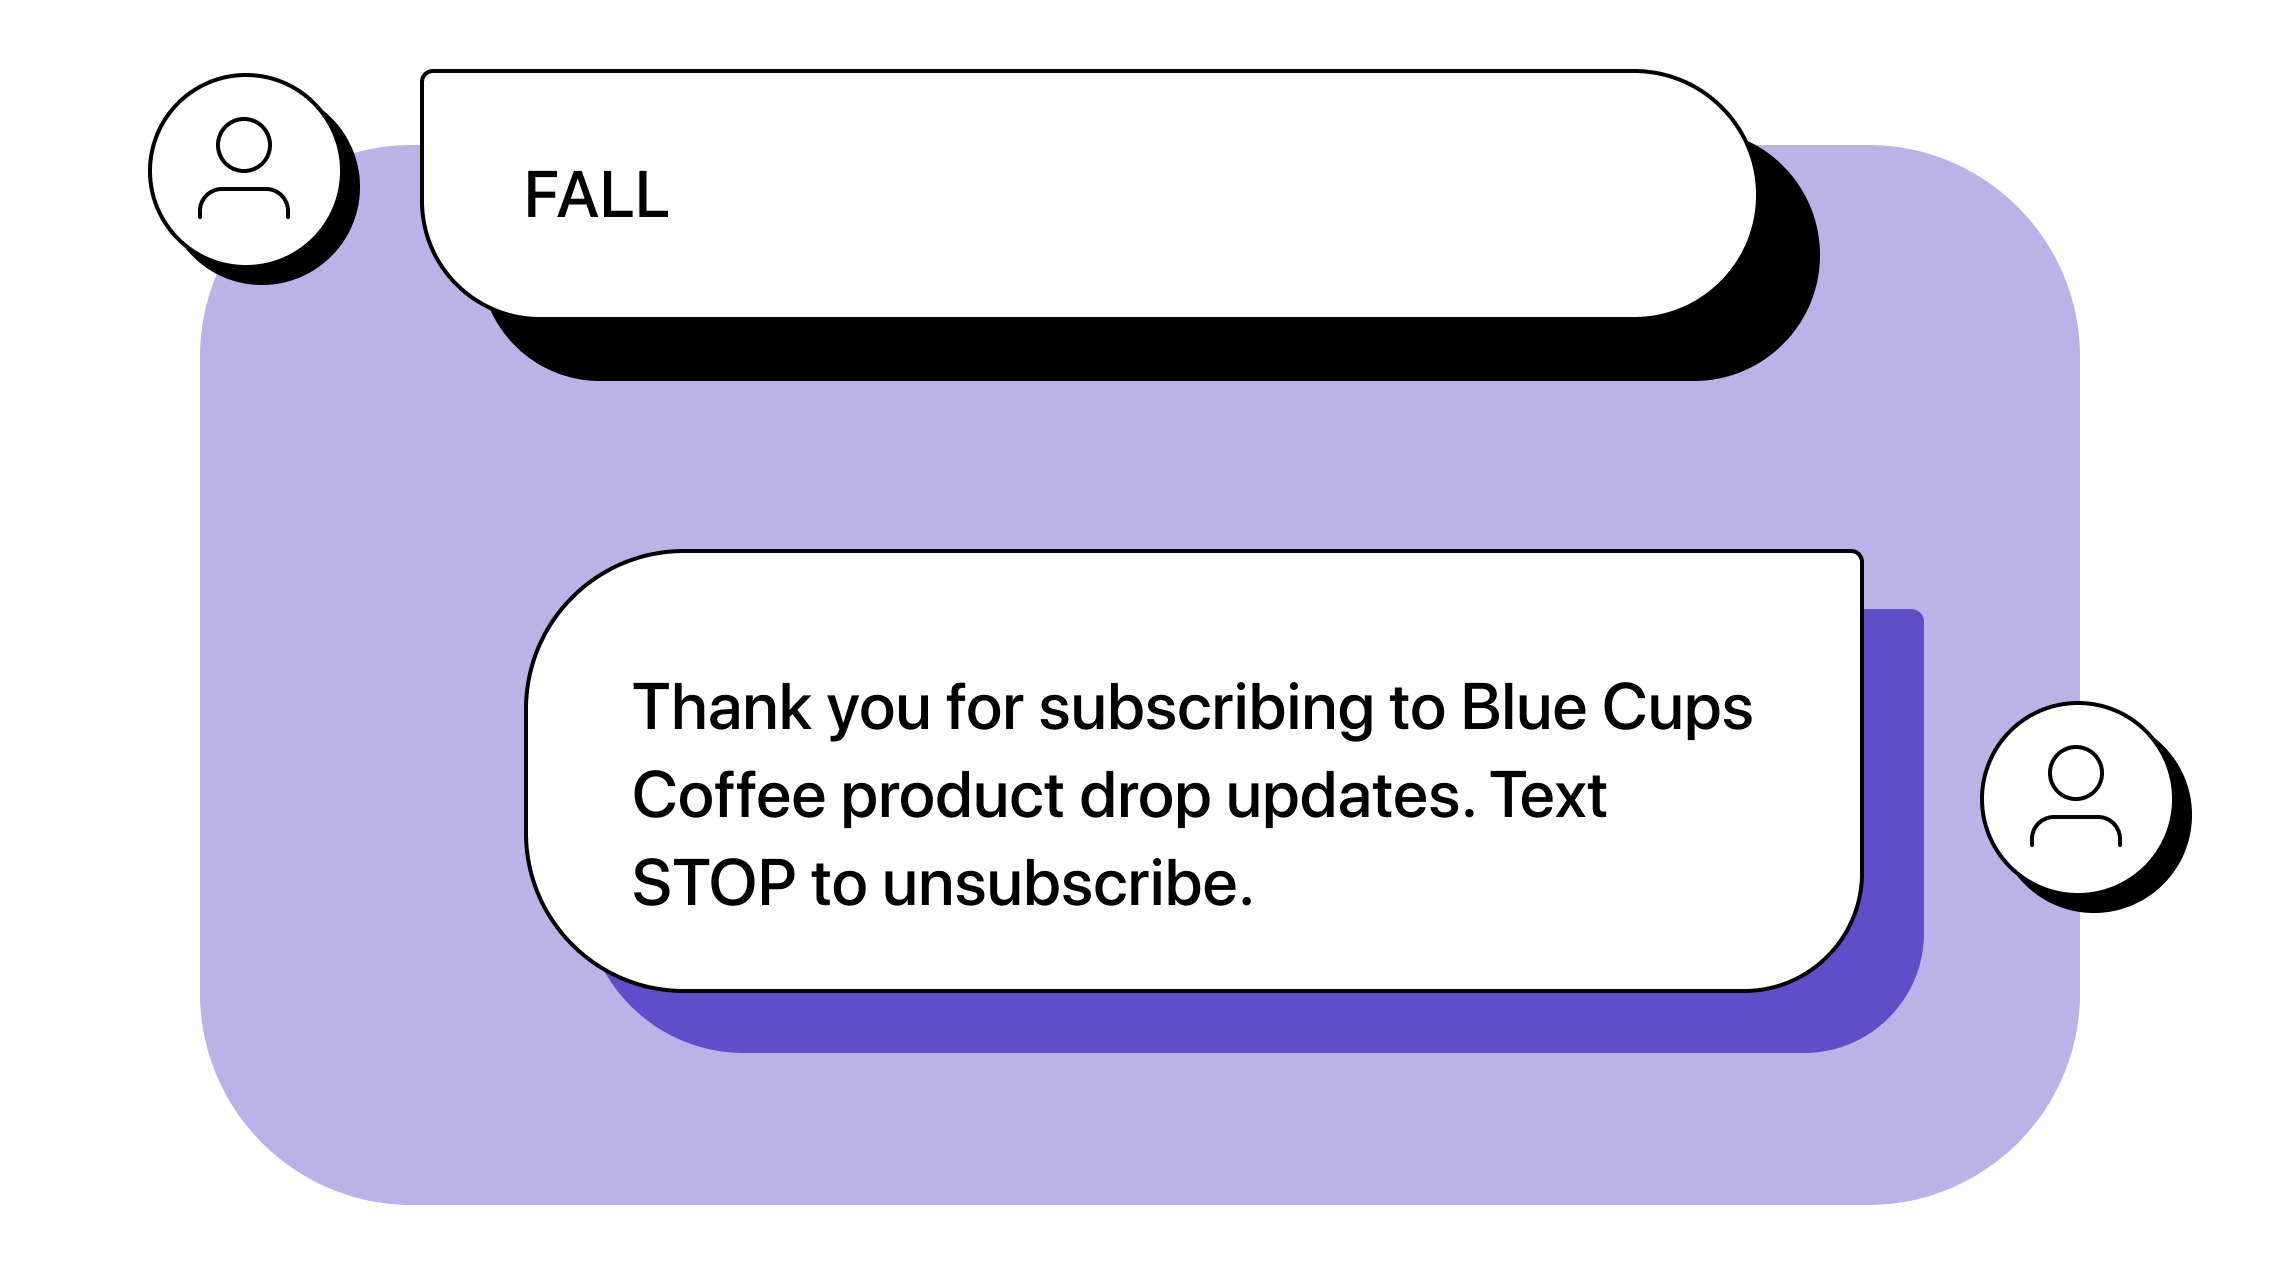 Customer: FALL Business: Thank you for subscribing to Blue Cups Coffee product drop updates. Text STOP to unsubscribe.